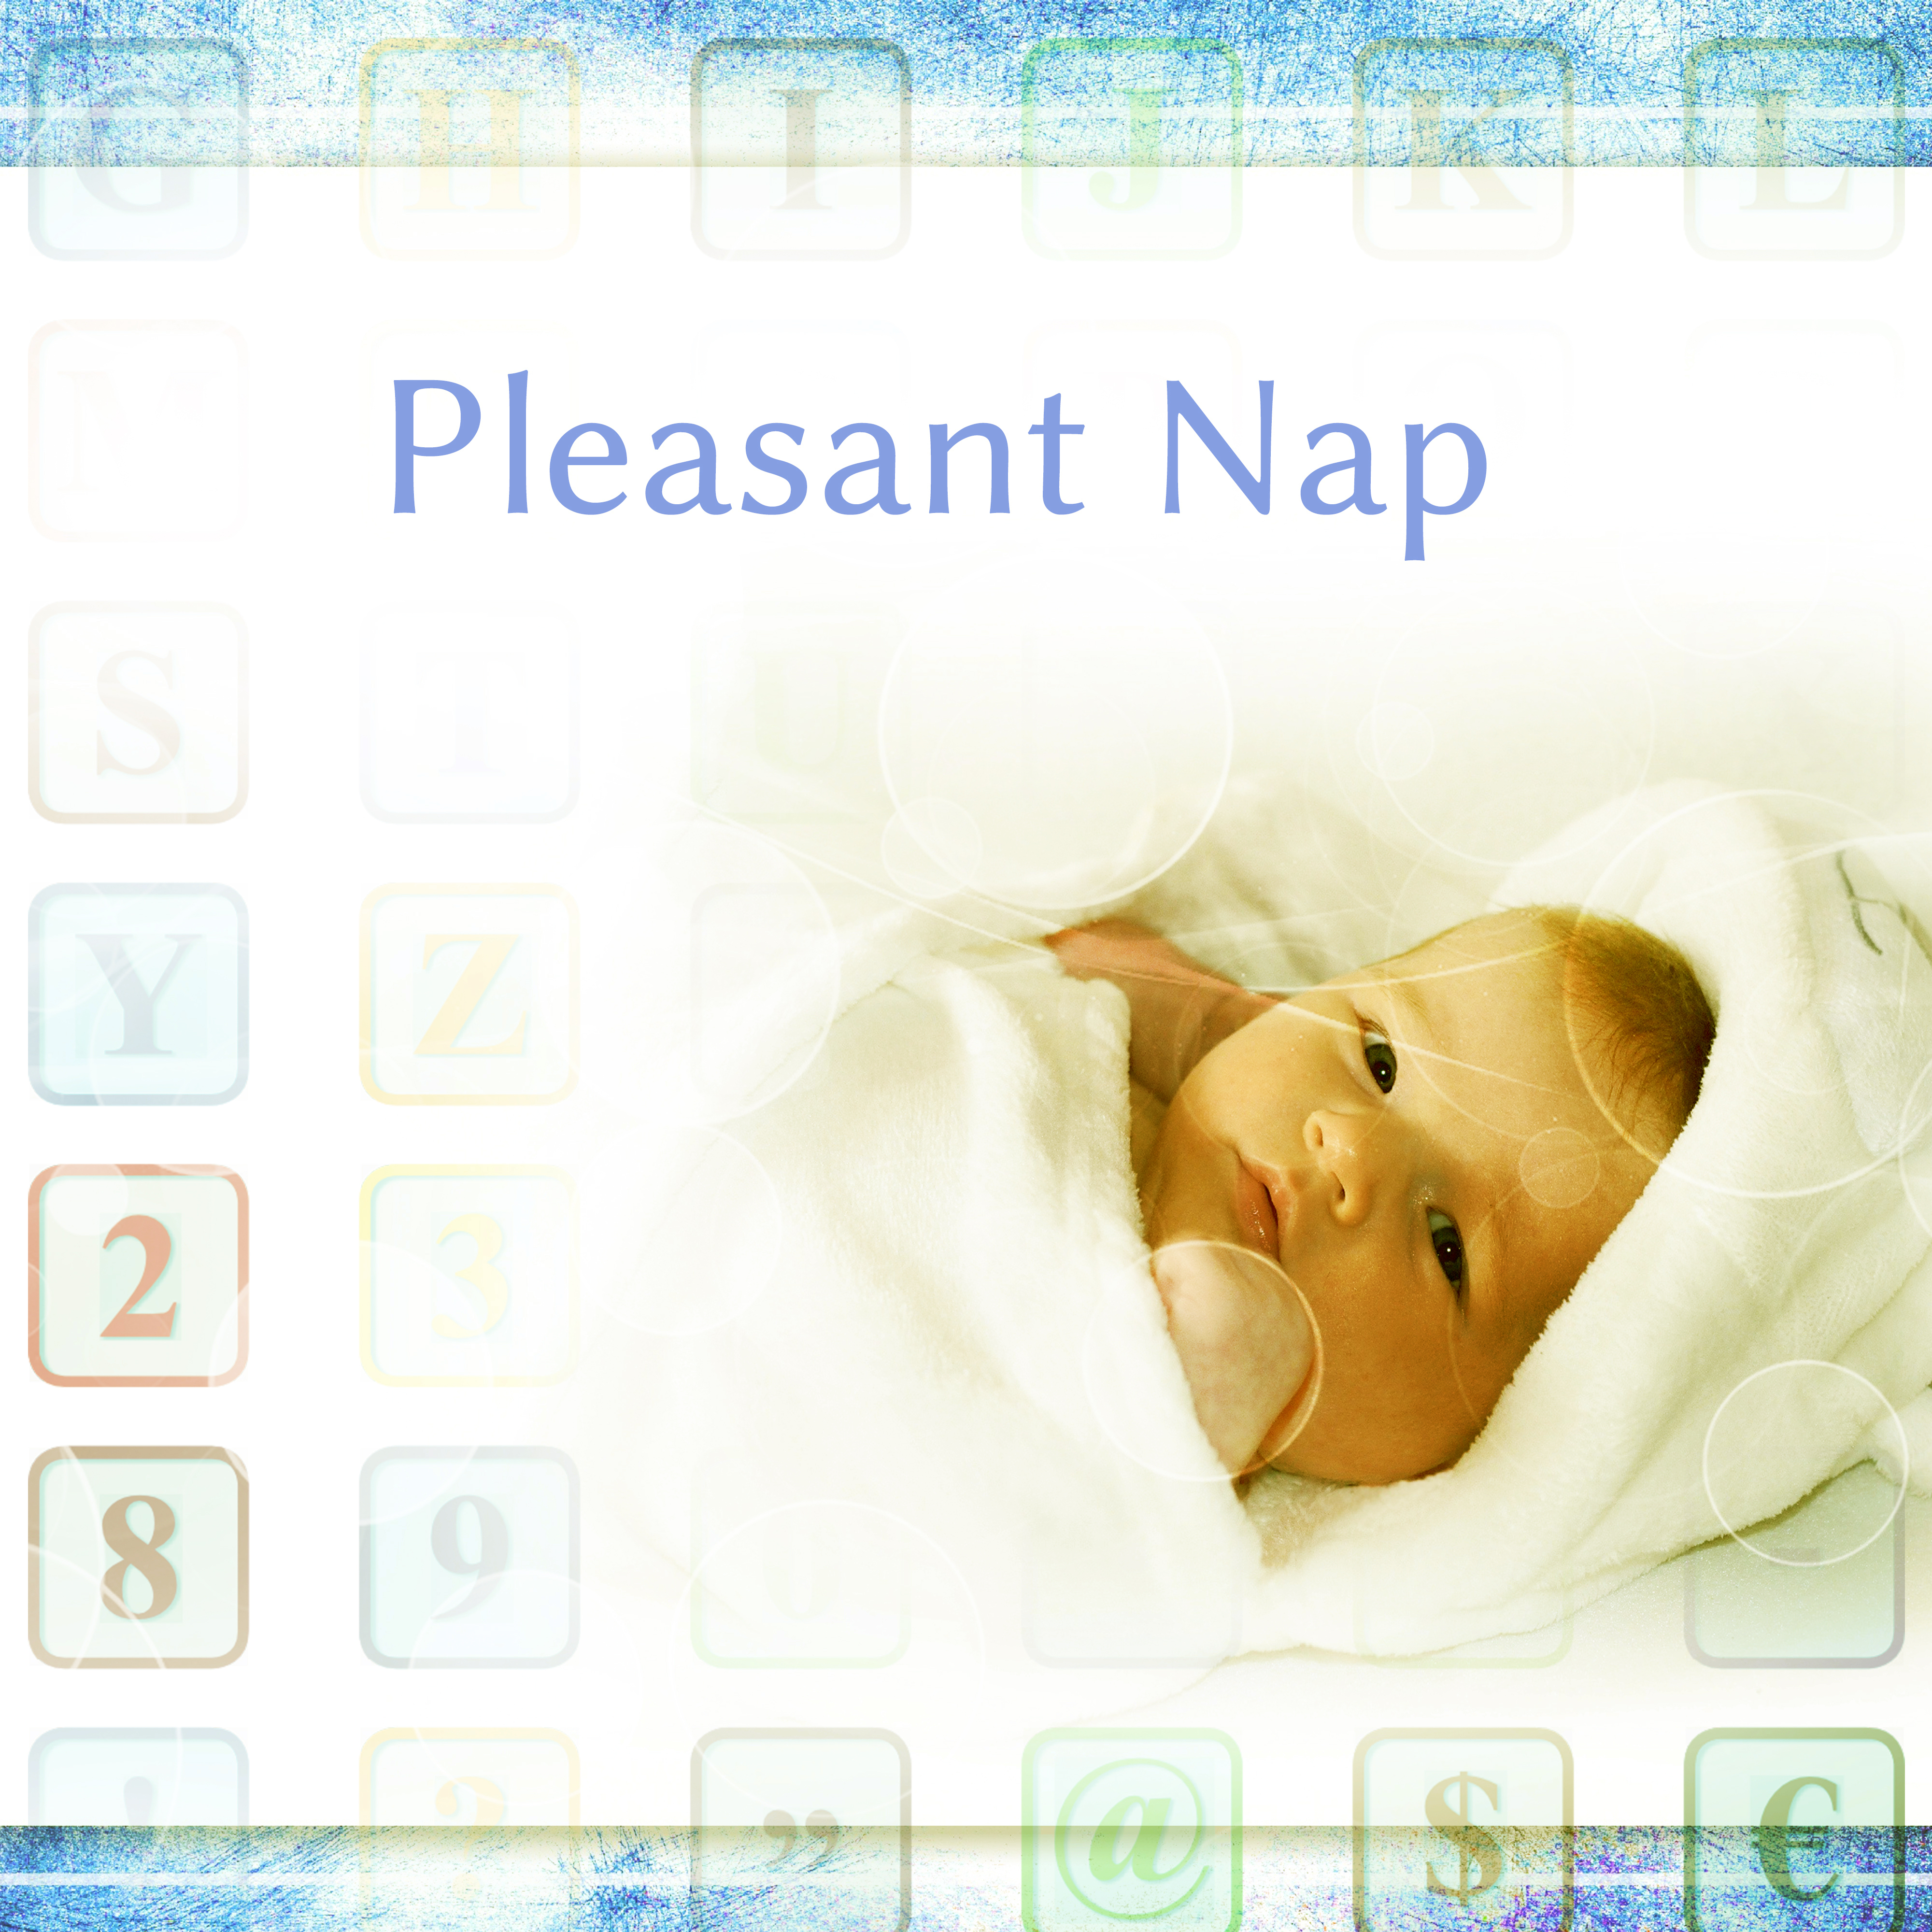 Pleasant Nap  Classical Melodies for Kids, Sweet, Calm Lullabies to Bed, Bach, Beethoven, Mozart